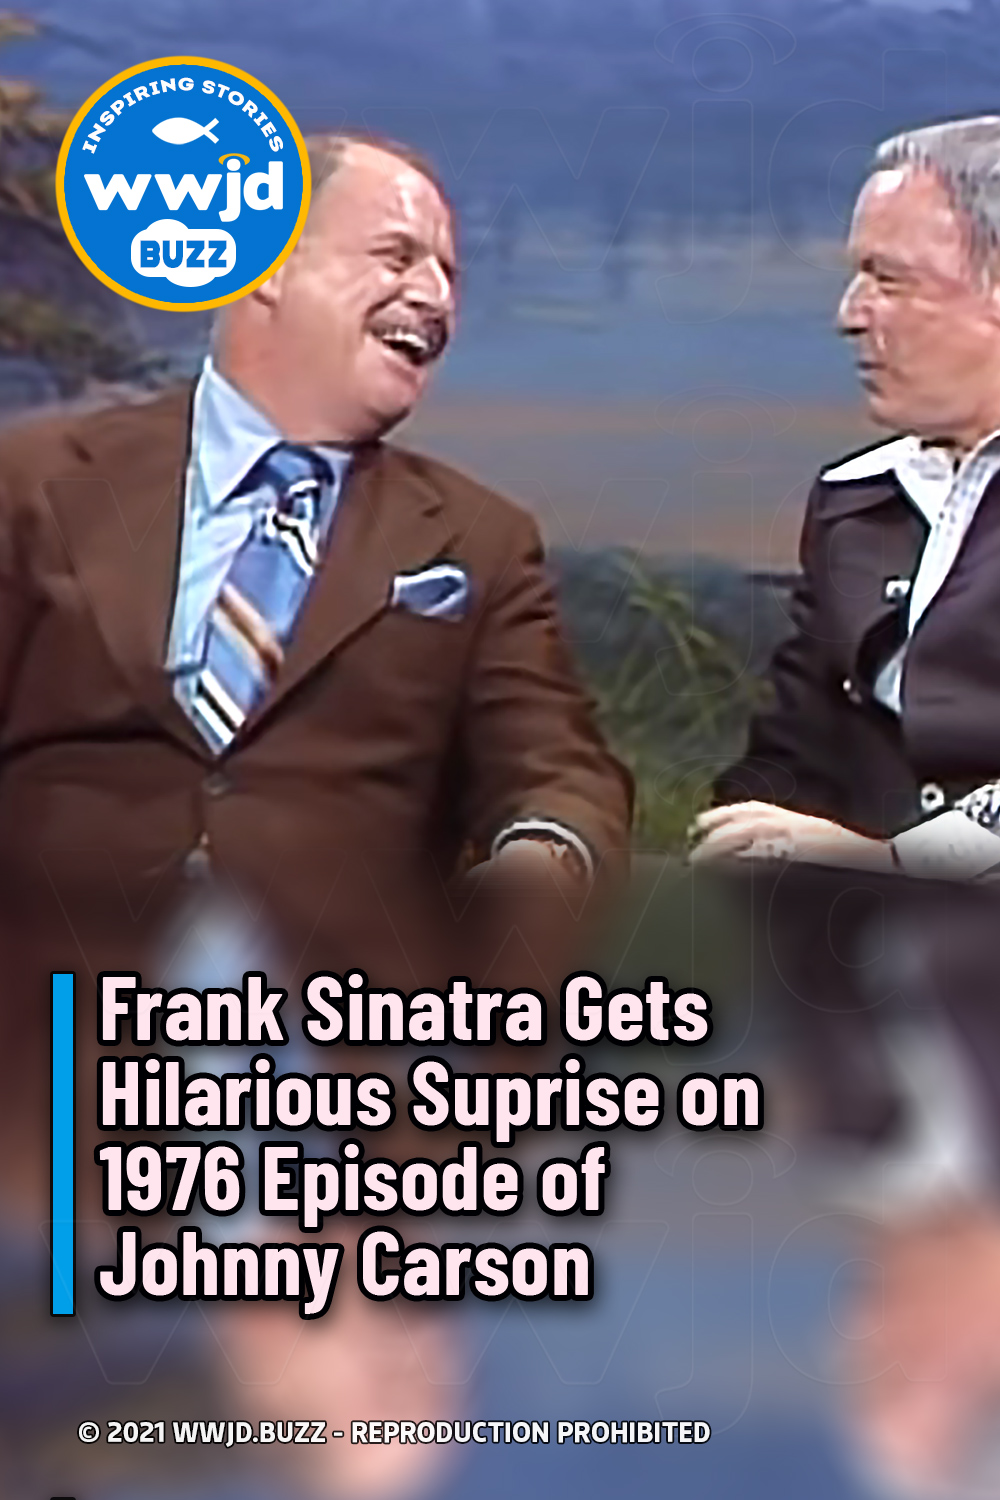 Frank Sinatra Gets Hilarious Surprise on 1976 Episode of Johnny Carson